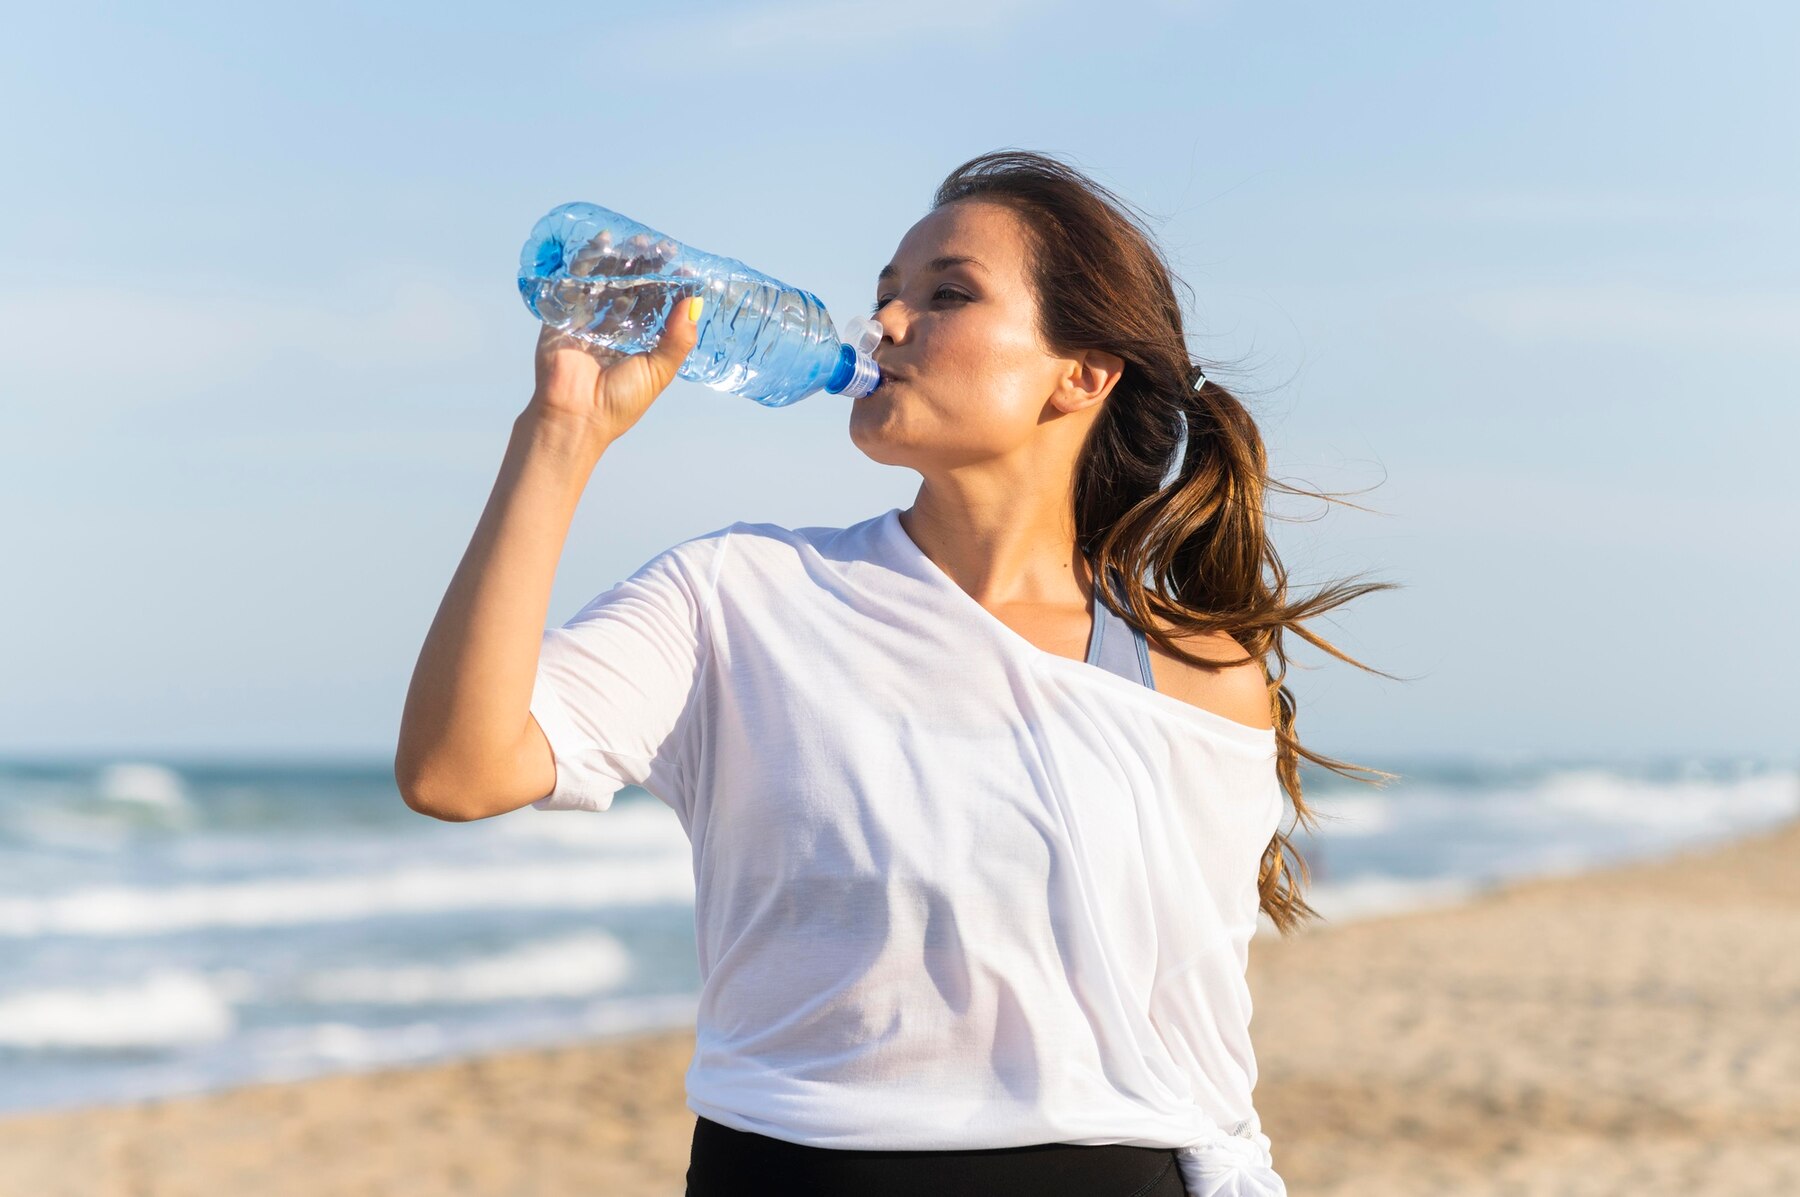 woman-drinking-water-on-the-beach-while-working-out_23-2148694906.jpg